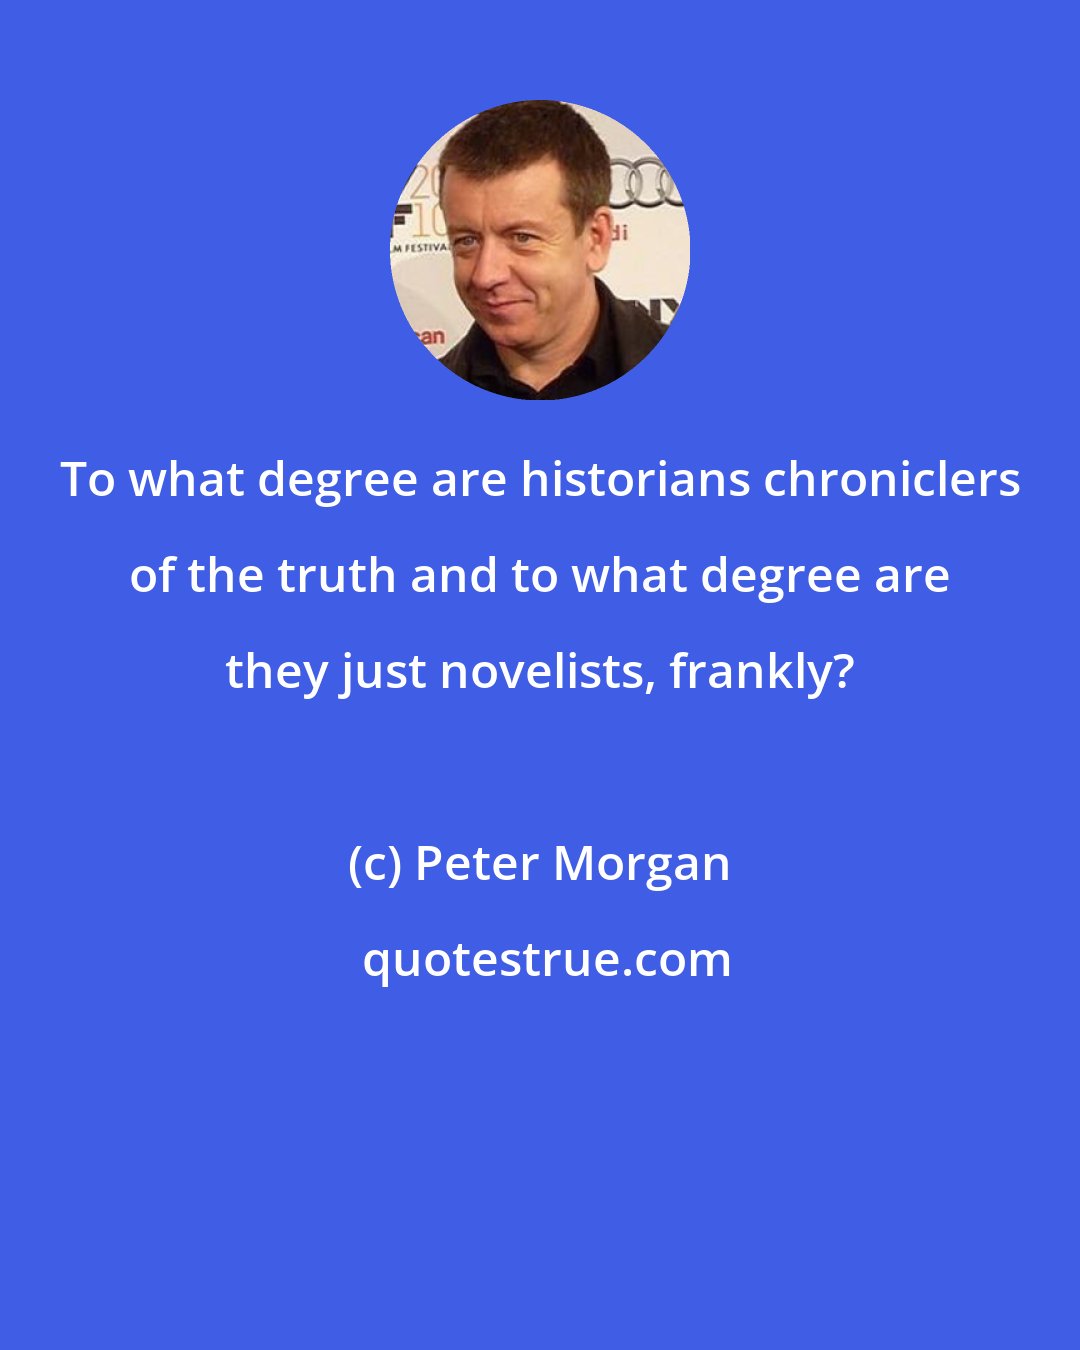 Peter Morgan: To what degree are historians chroniclers of the truth and to what degree are they just novelists, frankly?